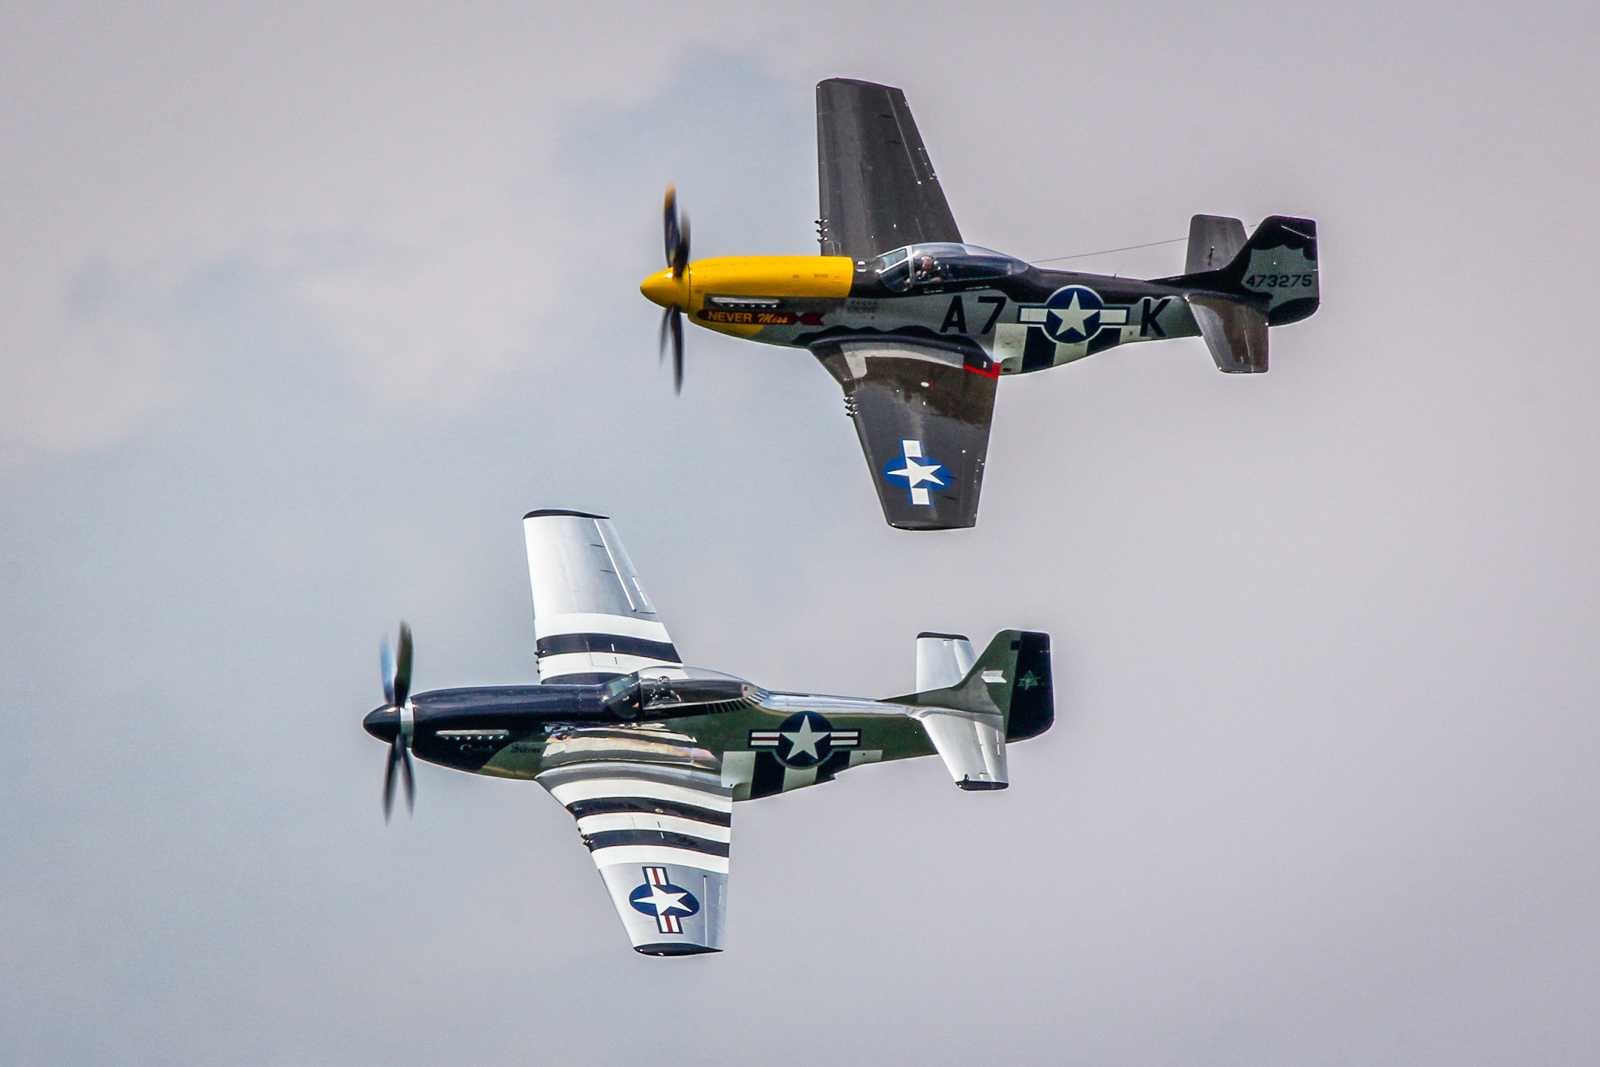 Two of the P-51D Mustangs in attendance included Mark Murphy in 'Never Miss' and Scott Yoak in 'Quick Silver'. (photo by Tom Pawlesh)